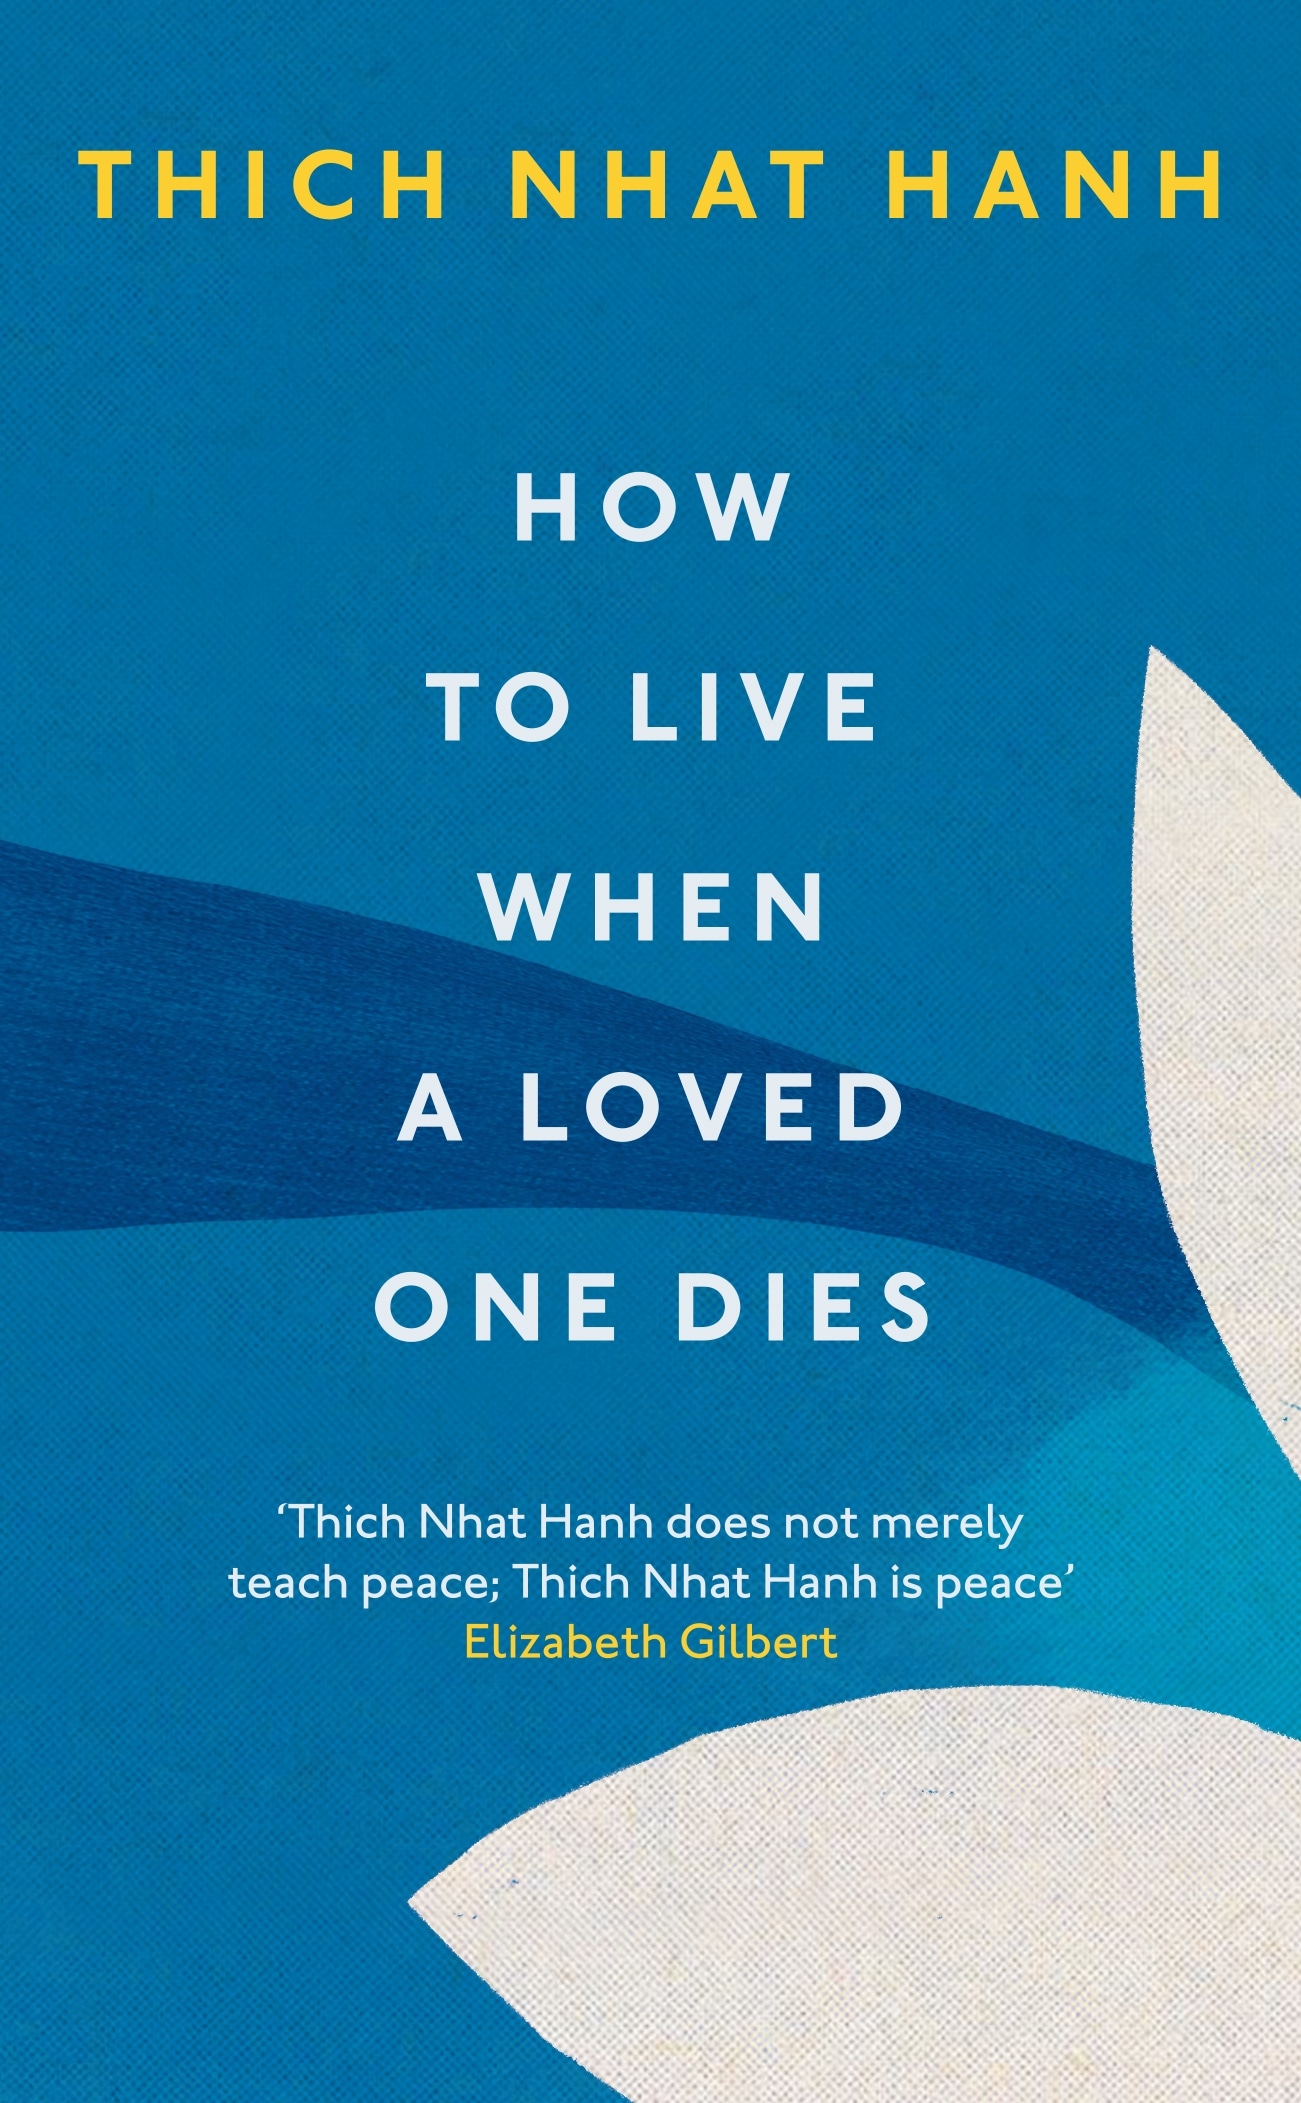 Book “How To Live When A Loved One Dies” by Thich Nhat Hanh — July 29, 2021